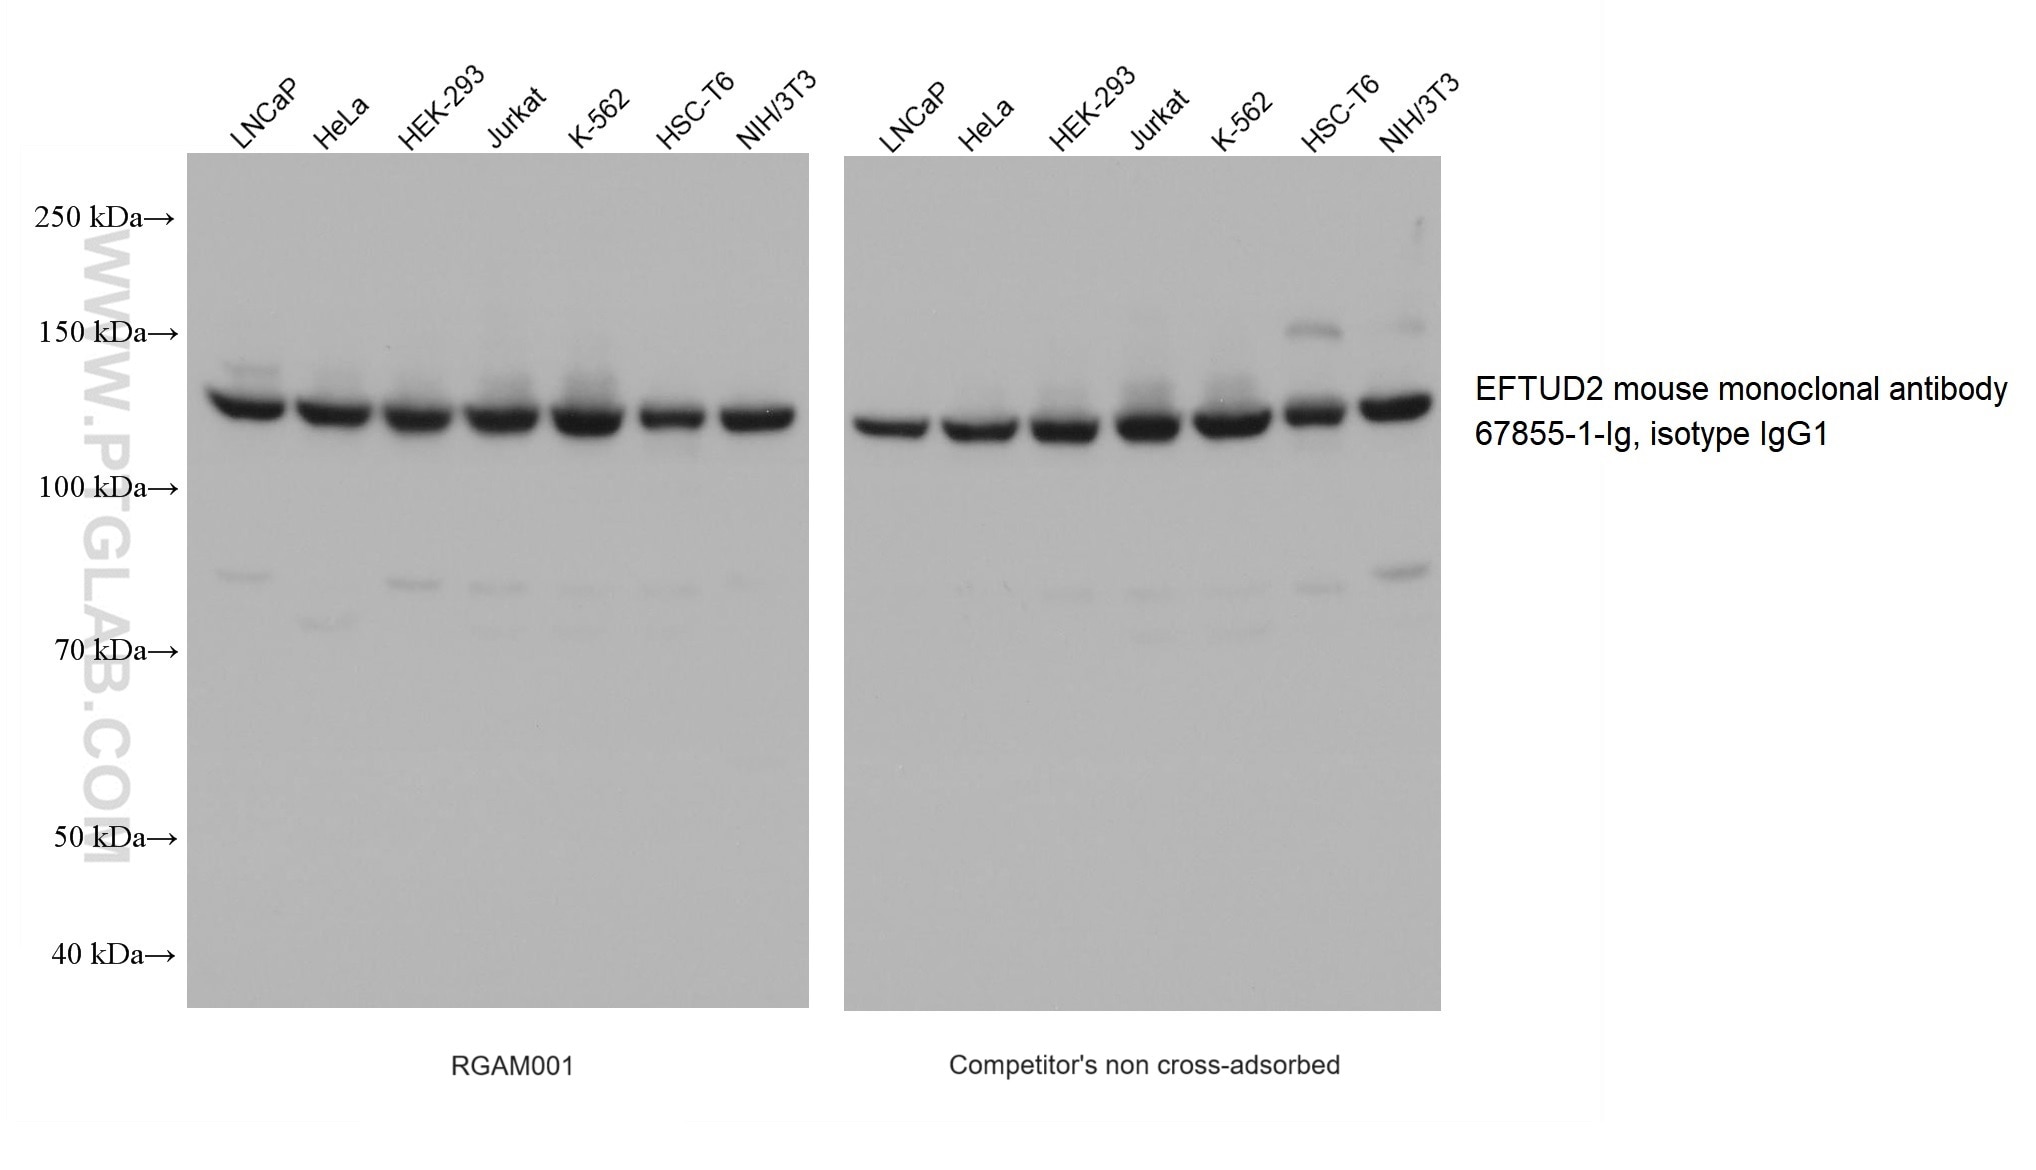 Various lysates were subjected to SDS-PAGE followed by western blot with EFTUD2 mouse monoclonal antibody (67855-1-Ig, isotype IgG1) at dilution of 1:10000.  RGAM001 (left) and competitor’s non cross-adsorbed HRP-Goat anti-mouse (H+L) secondary antibody (right) were both used at 0.05μg/mL for detection. 